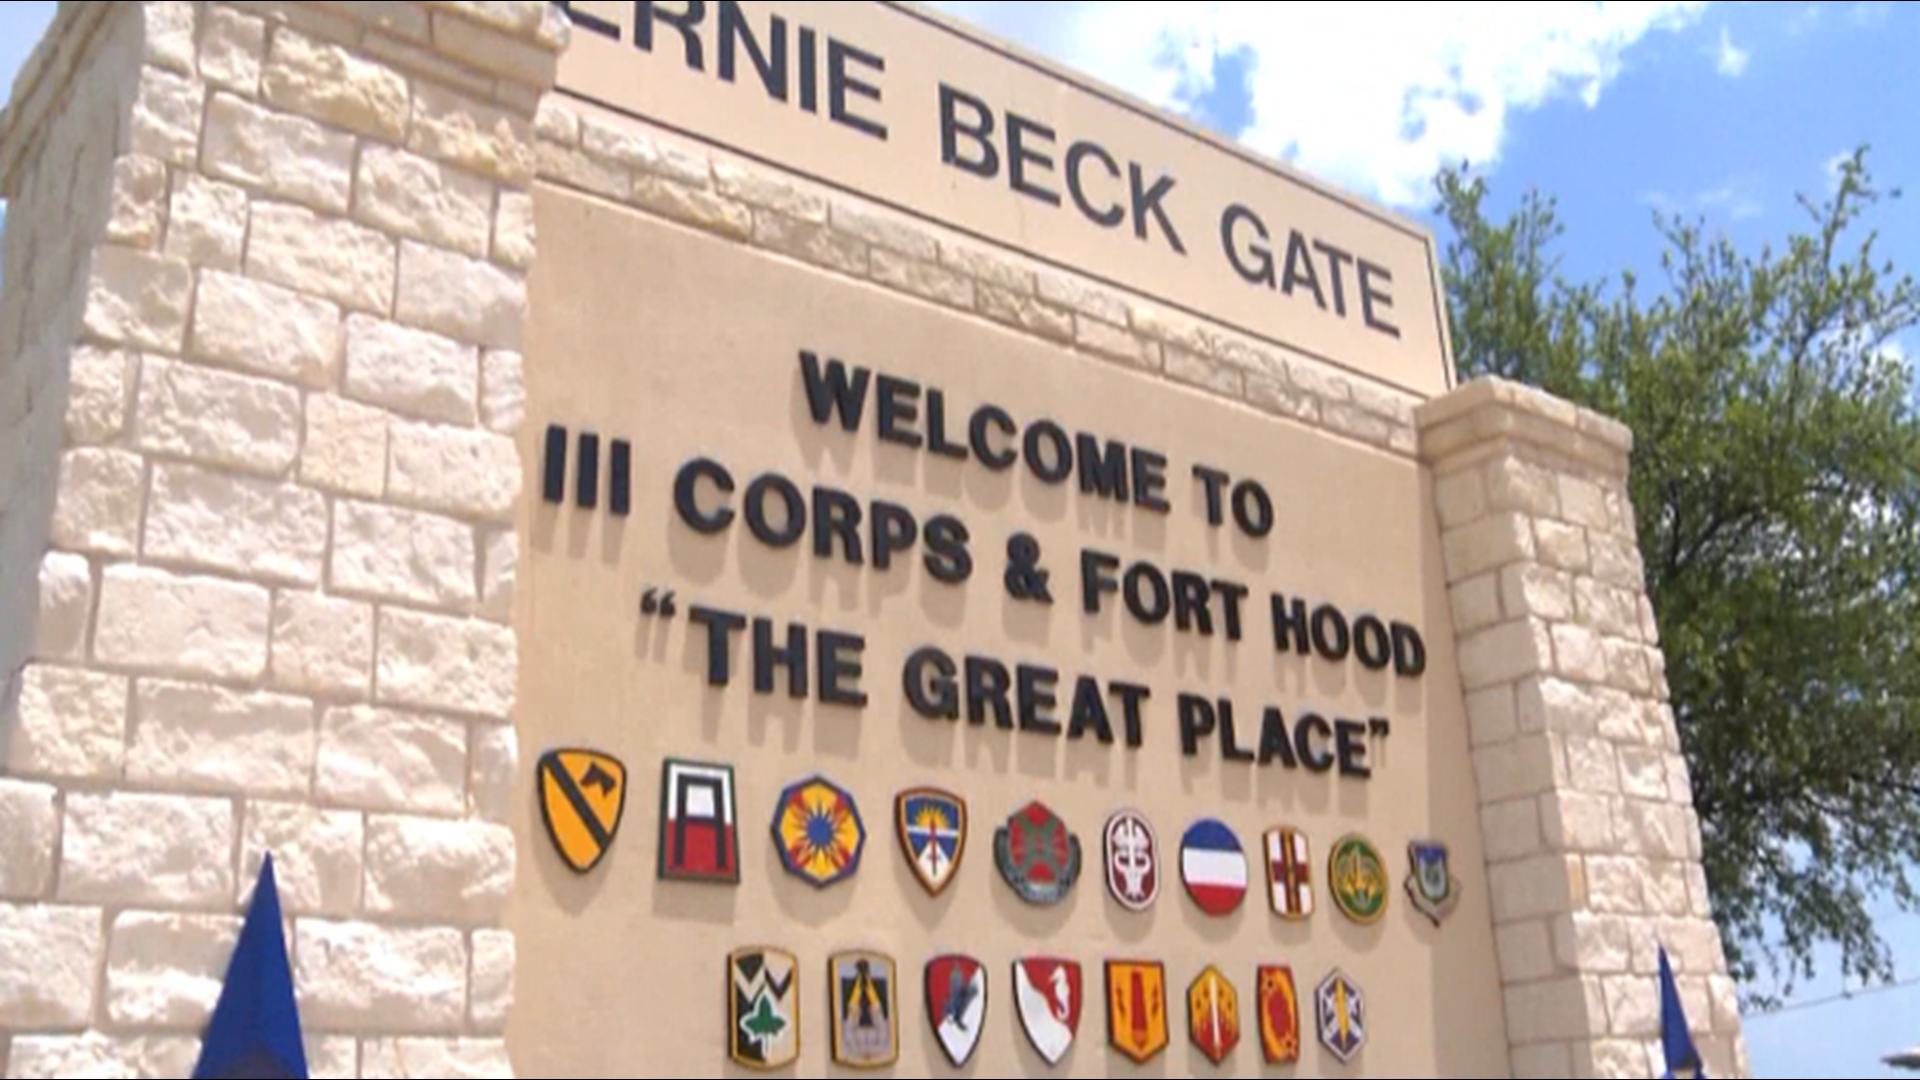 The Army announced that Fort Hood will receive significant funding to upgrade and build new housing for enlisted Soldiers Work will begin in summer 2021.